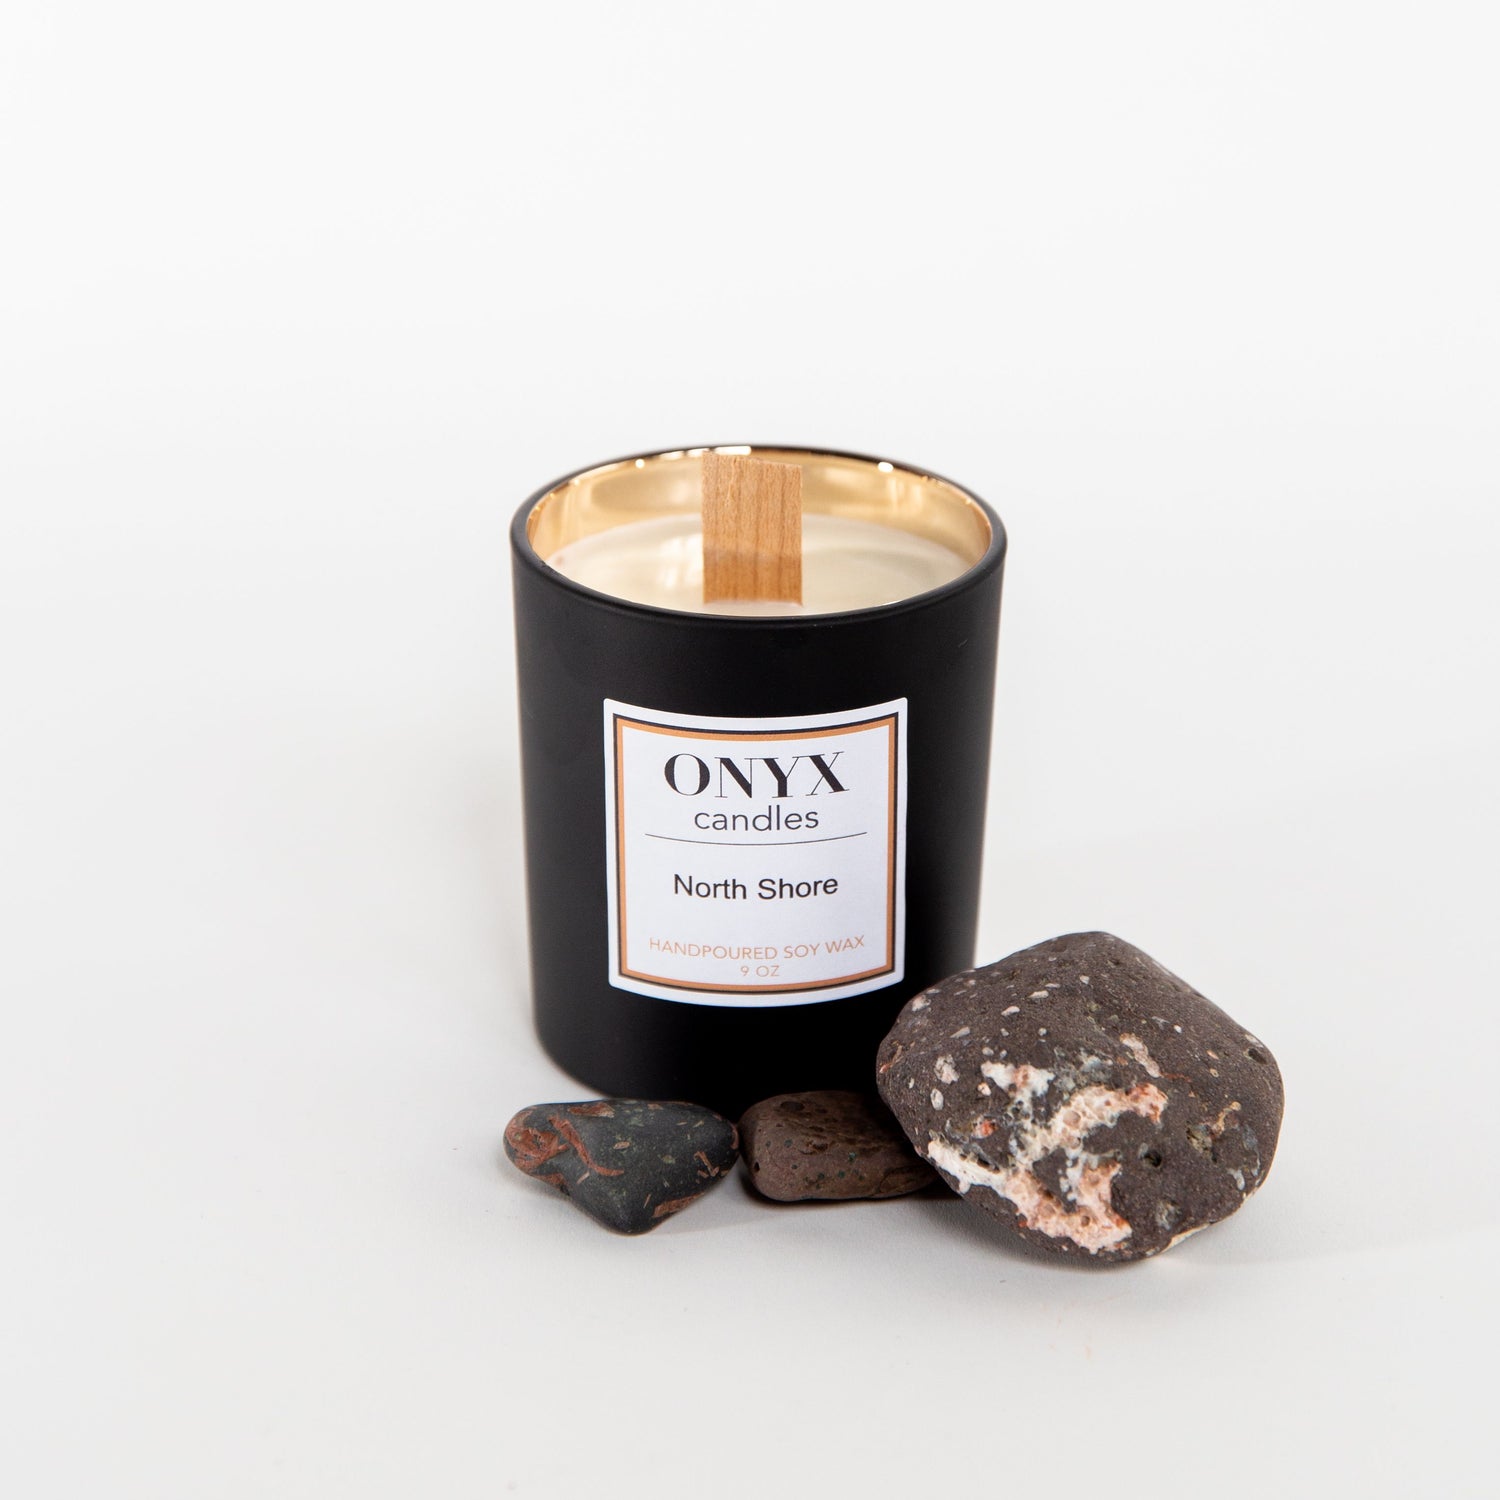 Pictured here is the 9oz matte black variant, featuring a gold interior and wooden wick. The candle is surrounded by natural stones from Minnesota's North Shore